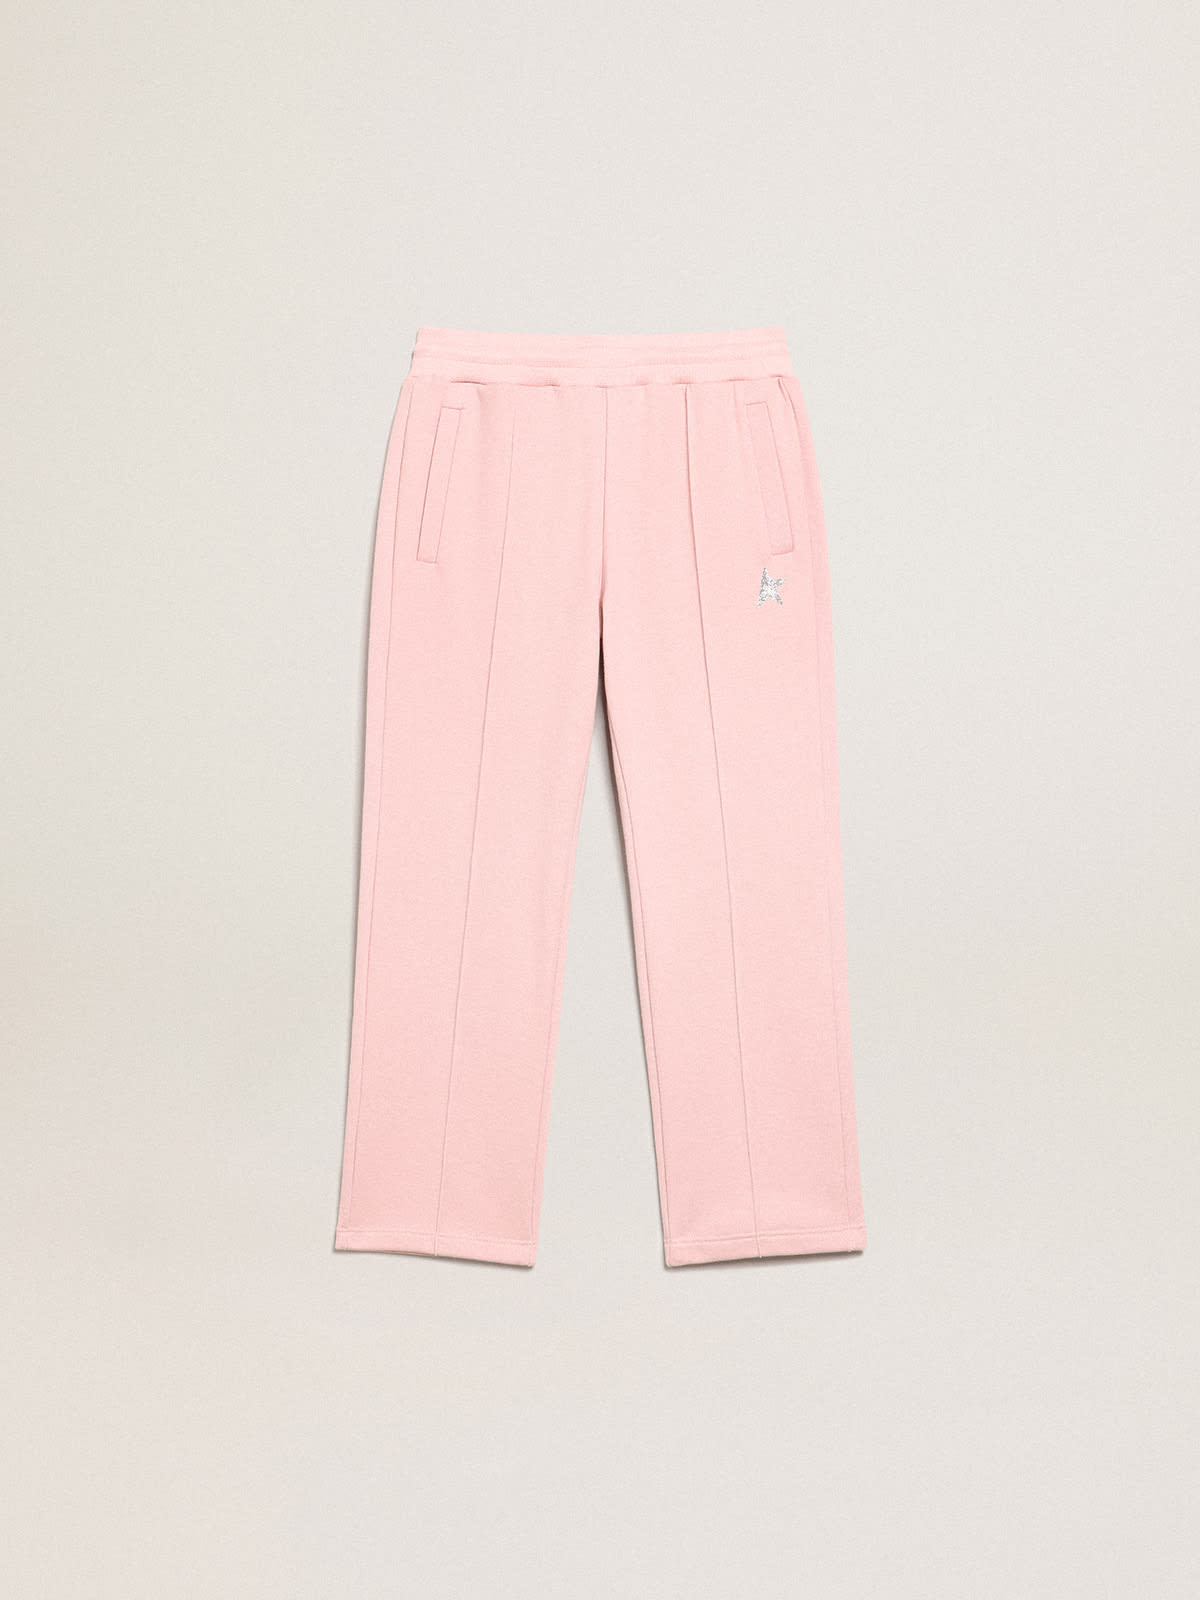 Golden Goose - Pink Star Collection jogging pants with silver glitter star on the front in 